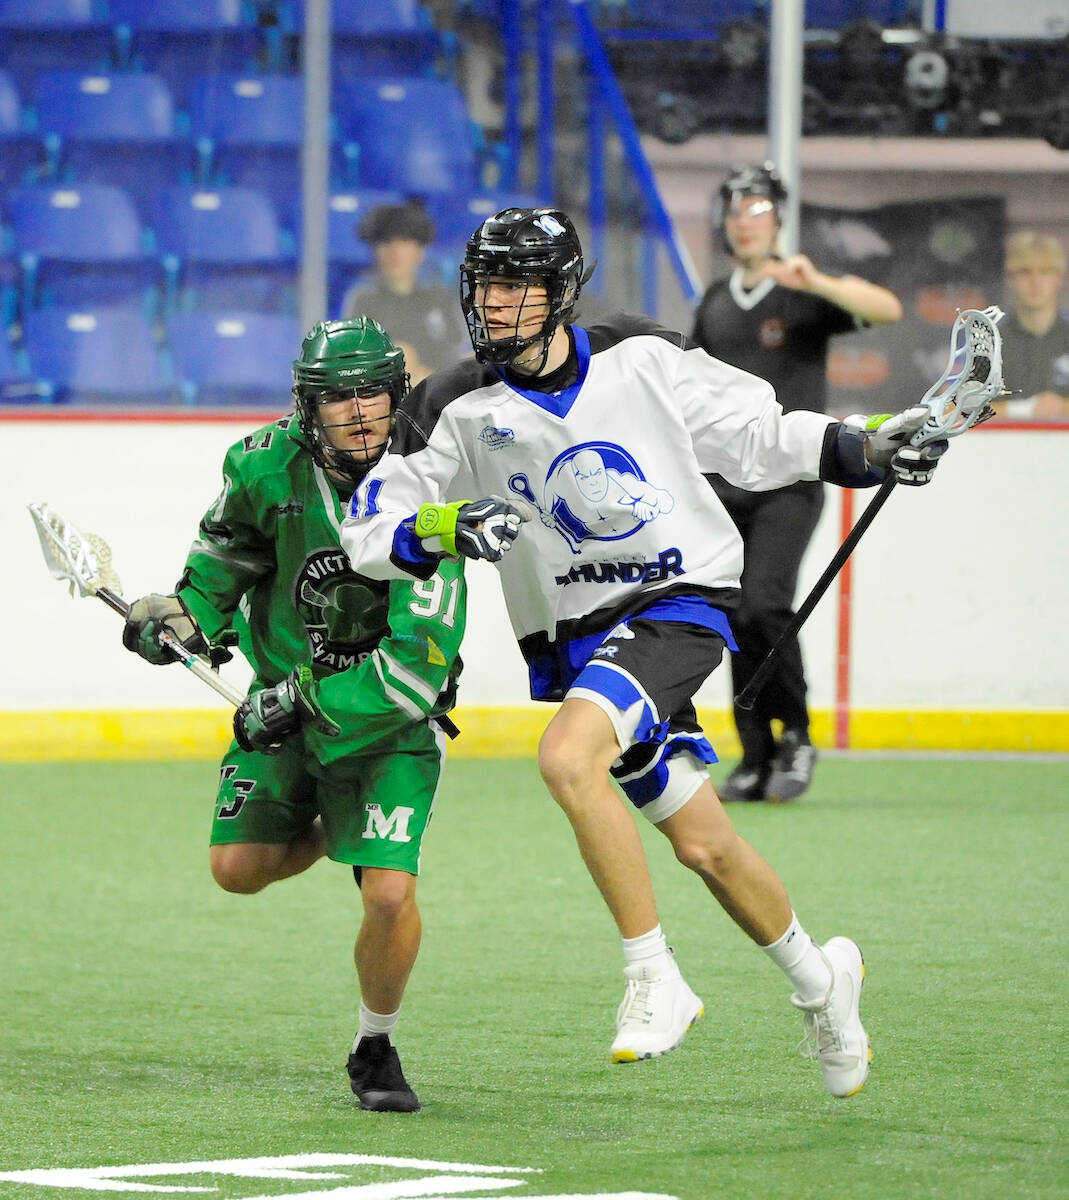 Tier 1 Thunder had a solid opening 20 minutes but things fell apart in the middle stanza as they surrendered nine goals, losing 17-8 to Victoria at LEC on Sunday, May 28. (Langley Events Centre/Special to Langley Advance Times)